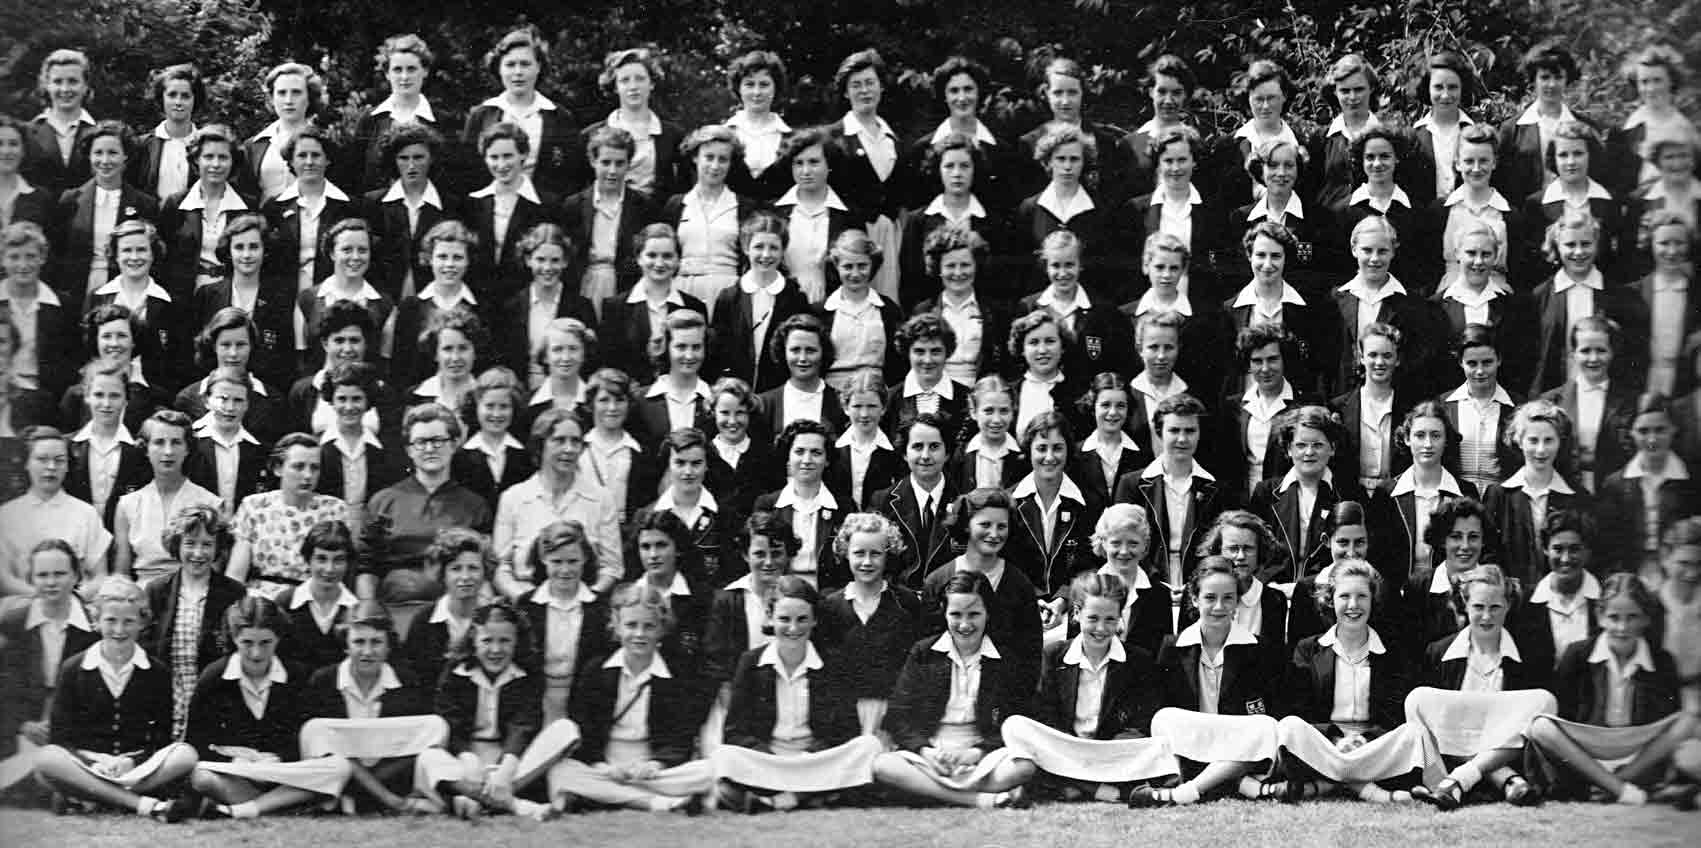 Fifth section of the 1952 school photograph for Copthall County Grammar School